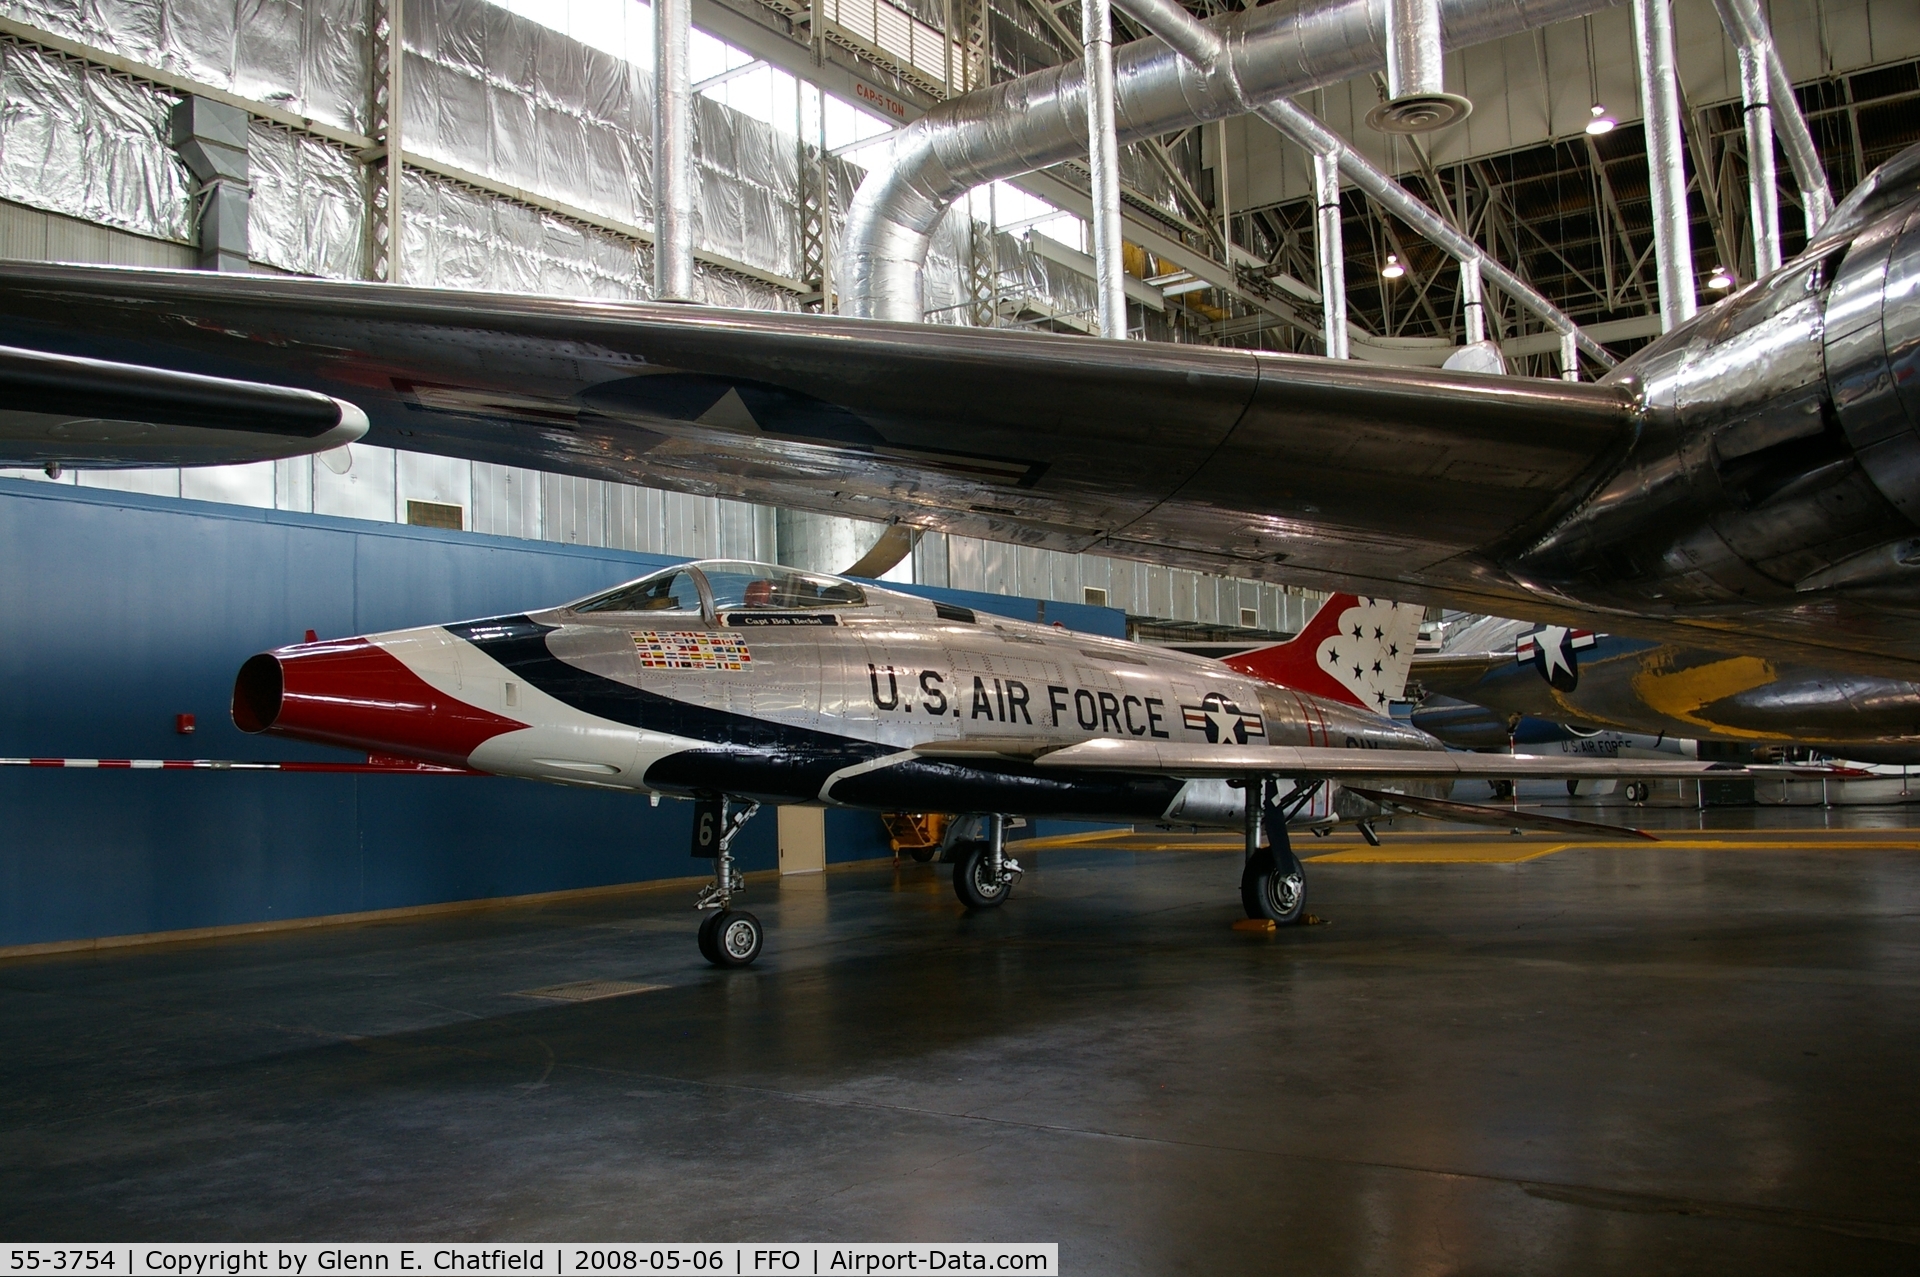 55-3754, 1956 North American F-100D Super Sabre C/N 223-436, F-100D displayed at the National Museum of the U.S. Air Force